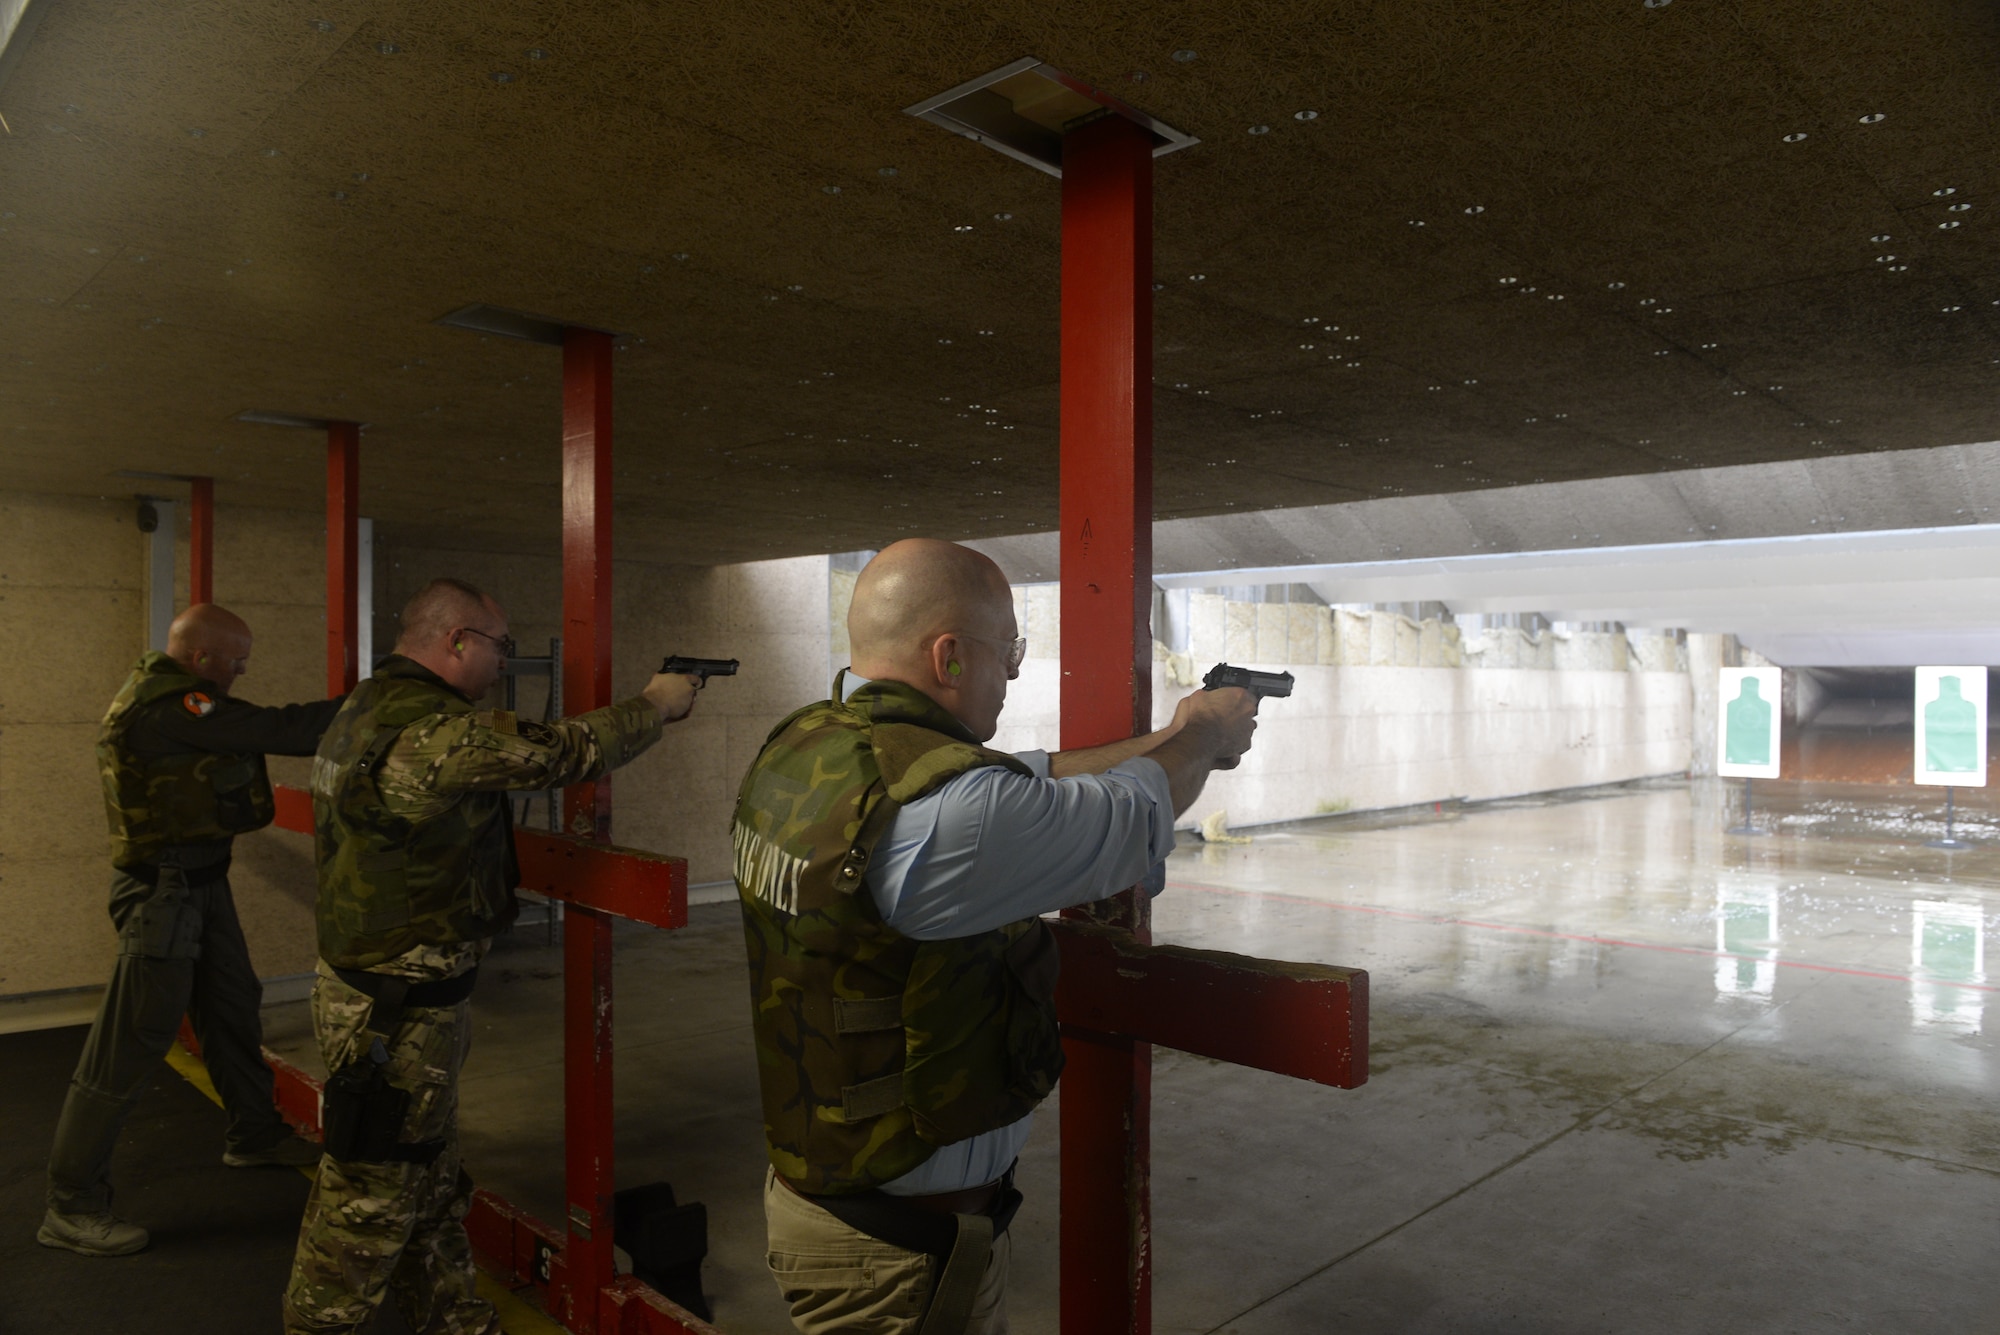 William P. McEvoy, 18th Wing History office chief, fires an M9 pistol during qualification training June 24, 2019, at Kadena Air Base, Japan. McEvoy recently deployed to Southeast asia in support of operations occuring there. (U.S. Air Force photo by Staff Sgt. Benjamin Sutton)